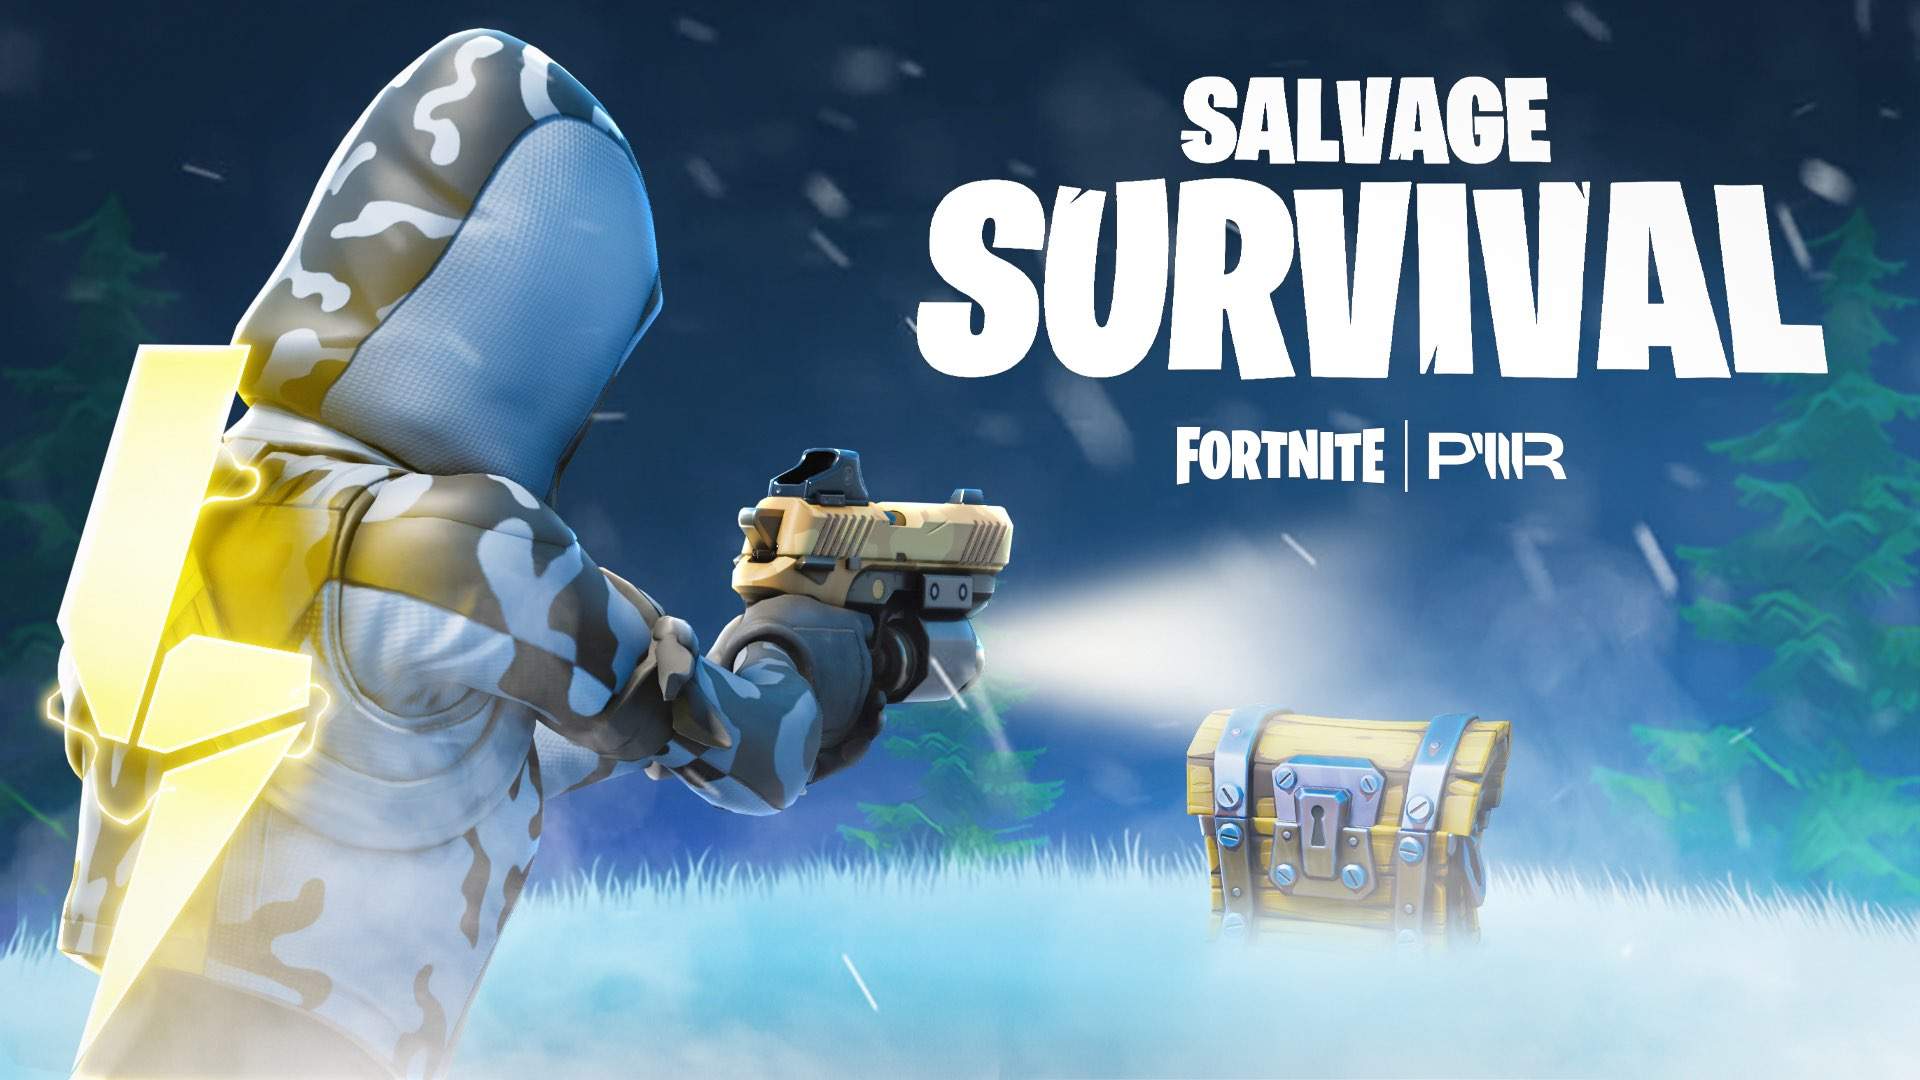 Pwr Salvage Survival Fortnite Creative Other And Map Code